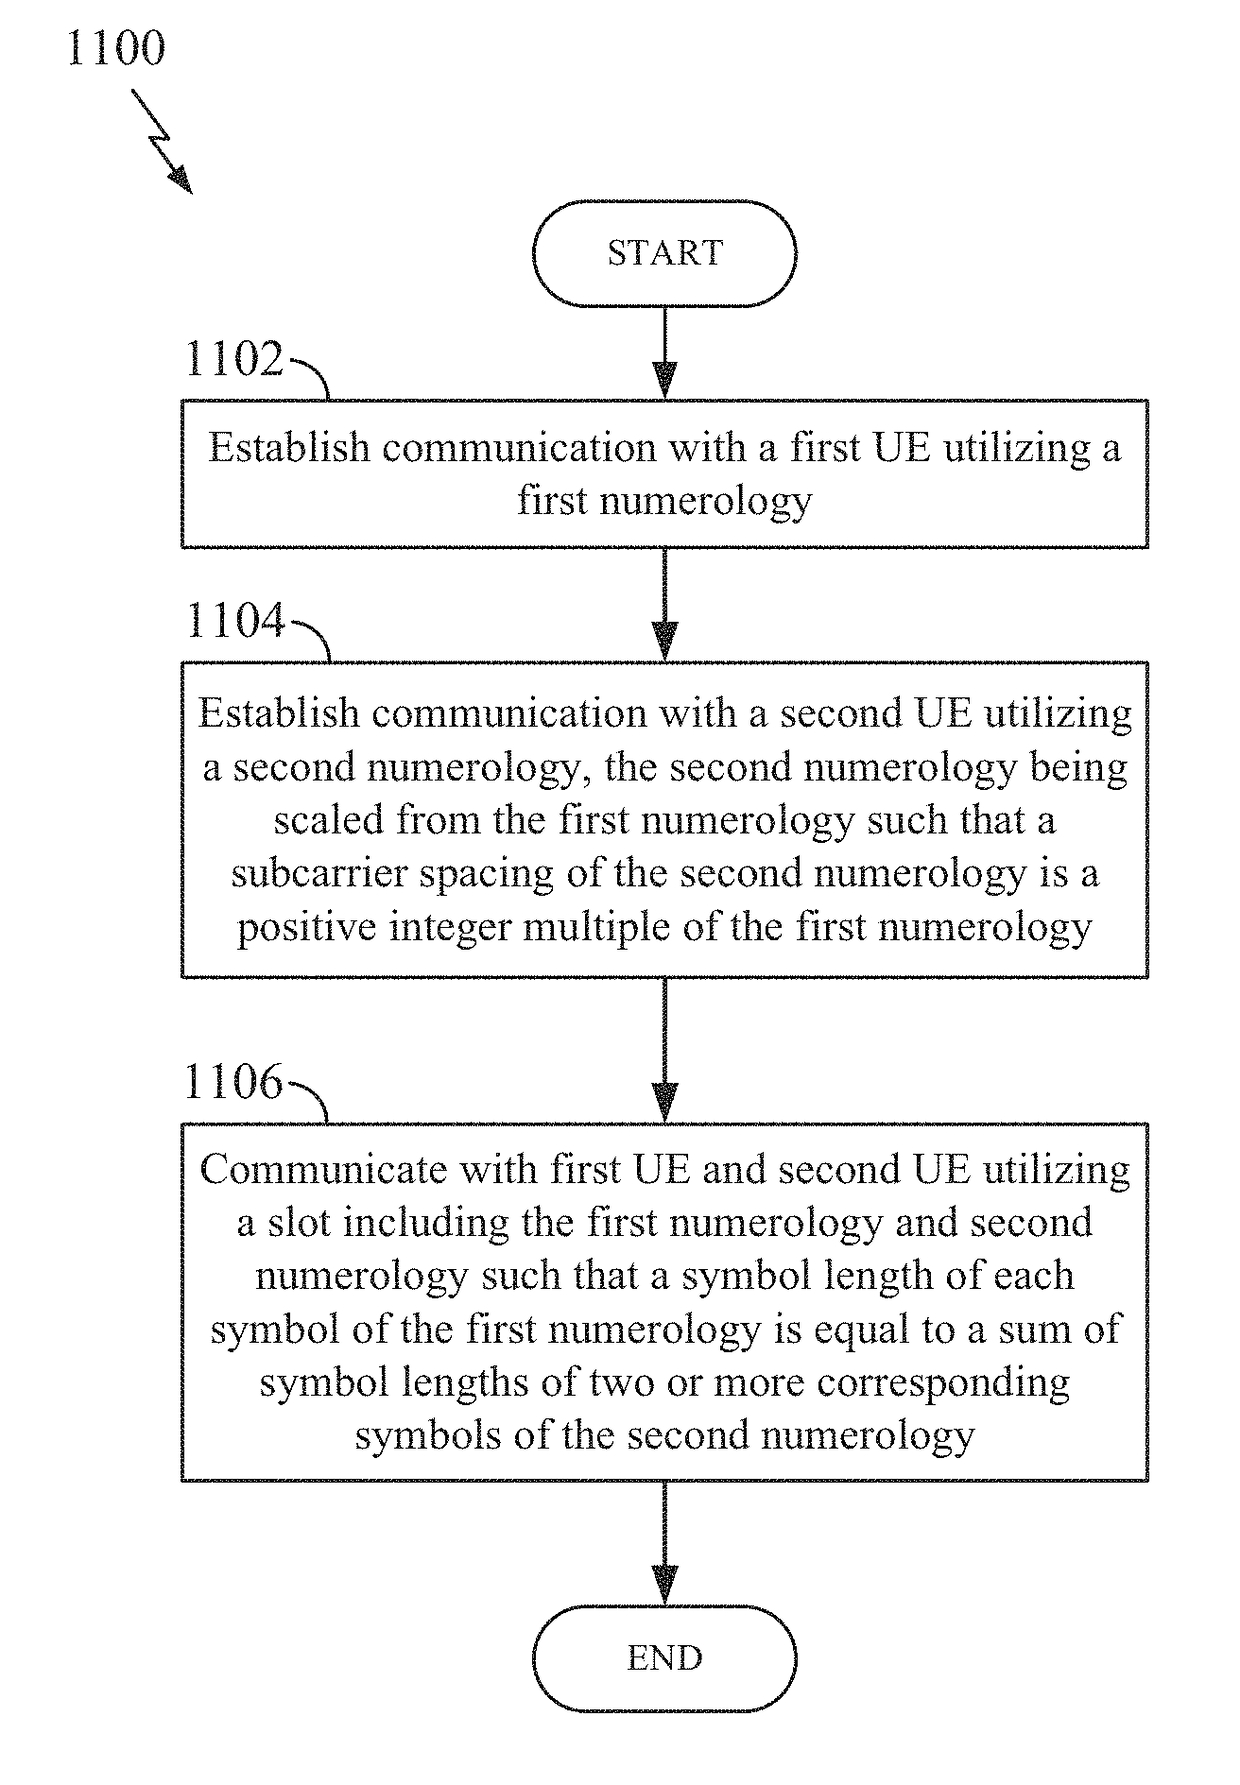 Scalable numerology with symbol boundary alignment for uniform and non-uniform symbol duration in wireless communication